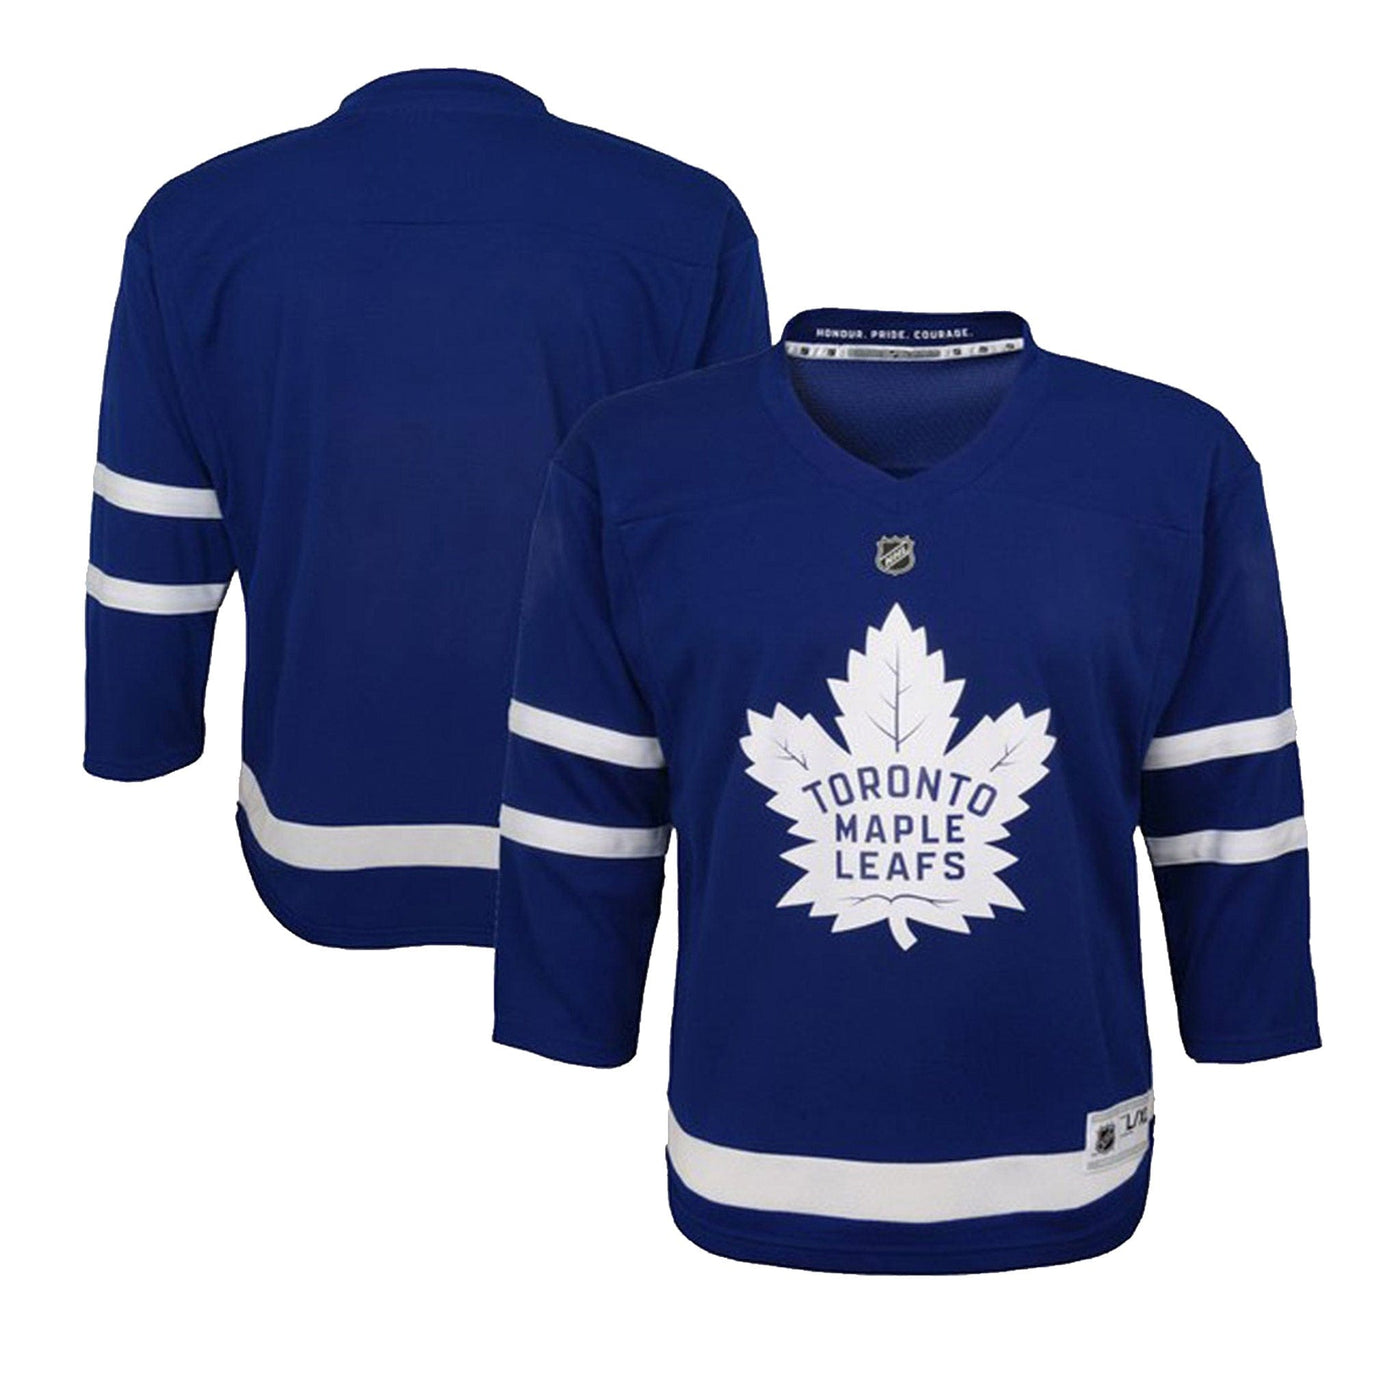 Outerstuff Toronto Maple Leafs NHL Premier Youth Replica NHL Hockey Jersey - Away / S/M